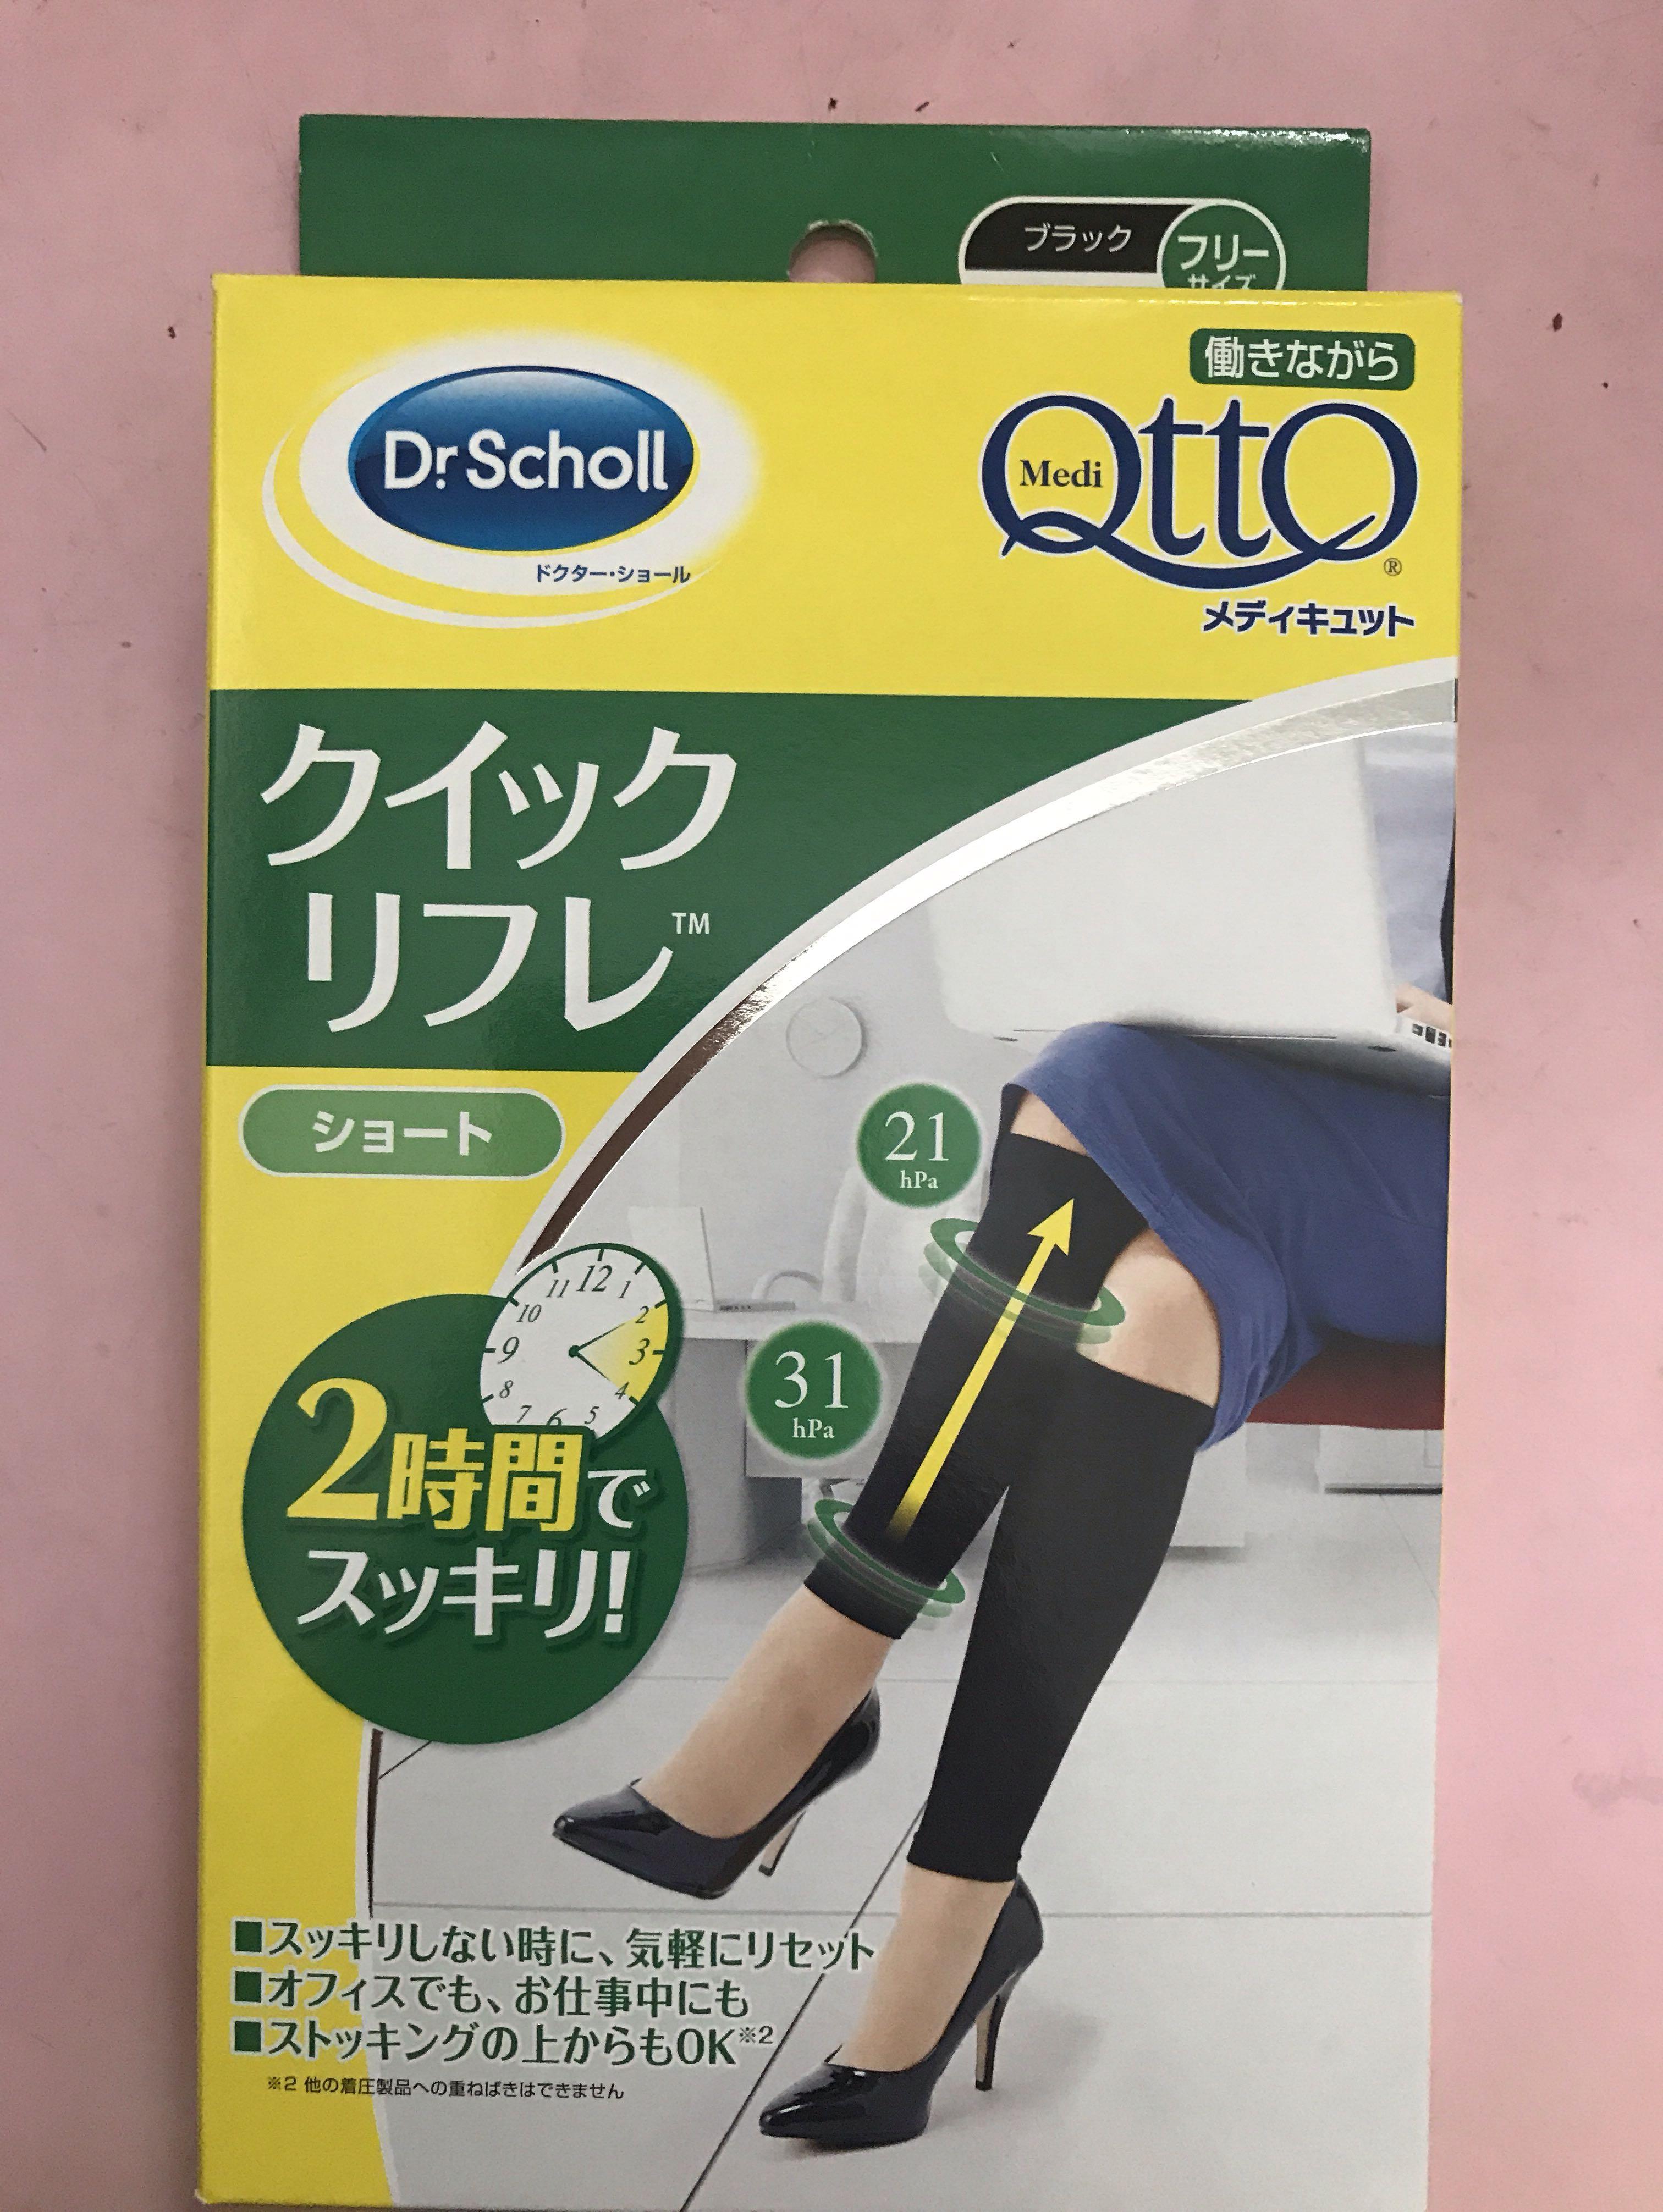 Scholl compression hosiery for sleeping, Beauty & Personal Care, Foot Care  on Carousell